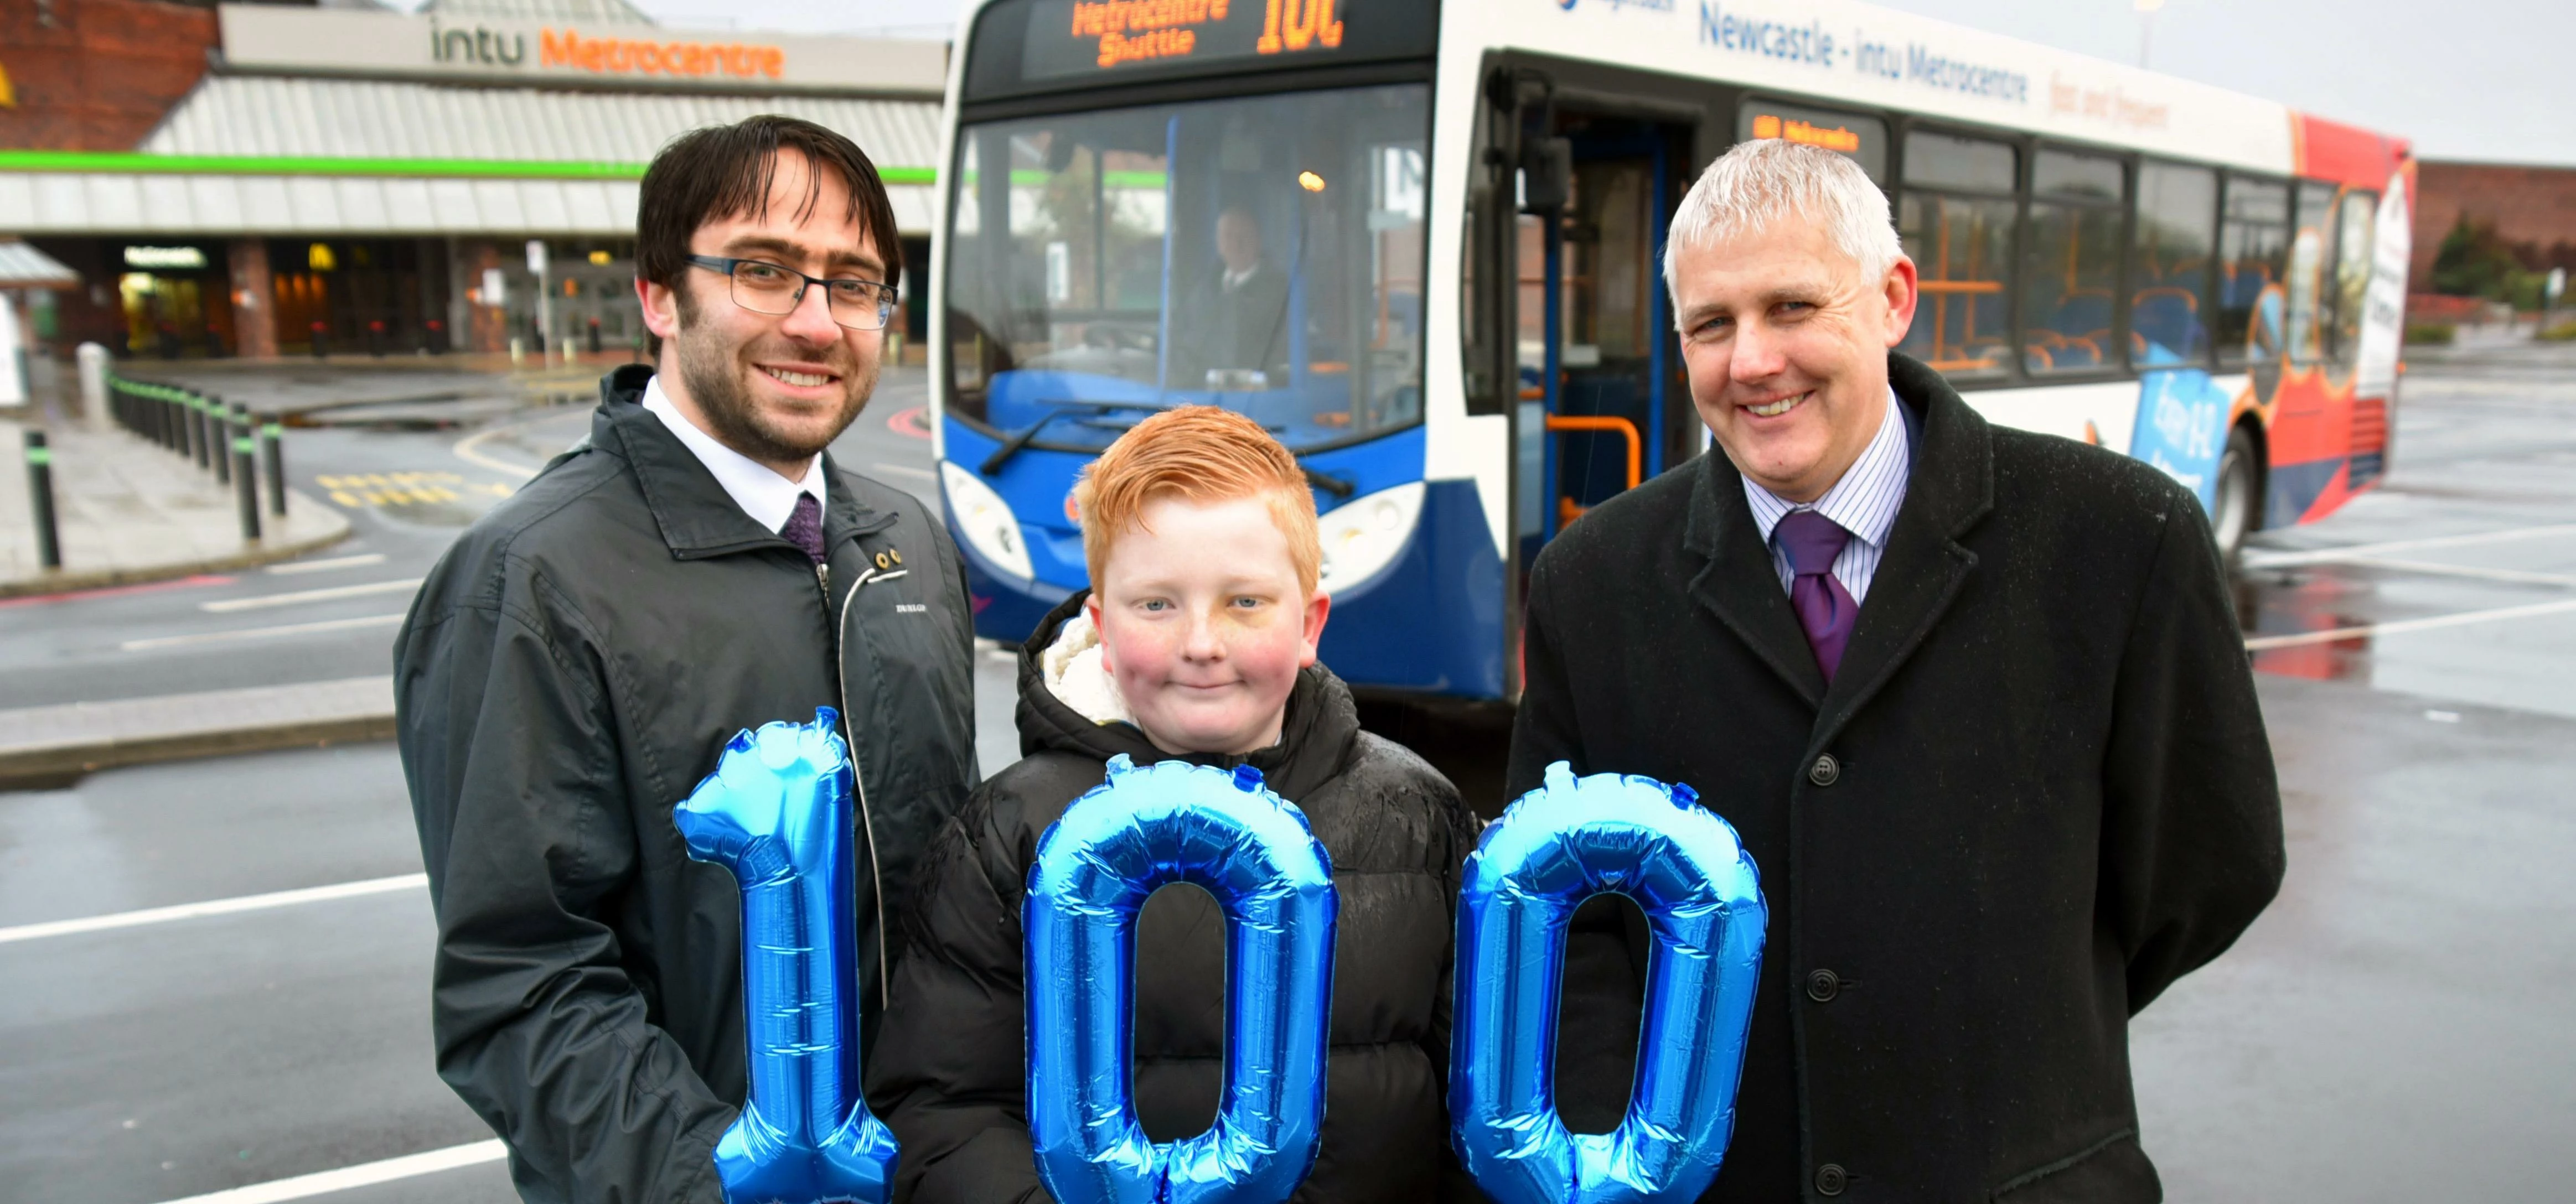 Dr Gareth Evans, intu's regional sustainable travel manager, Colin Newbury, Stagecoach North East op